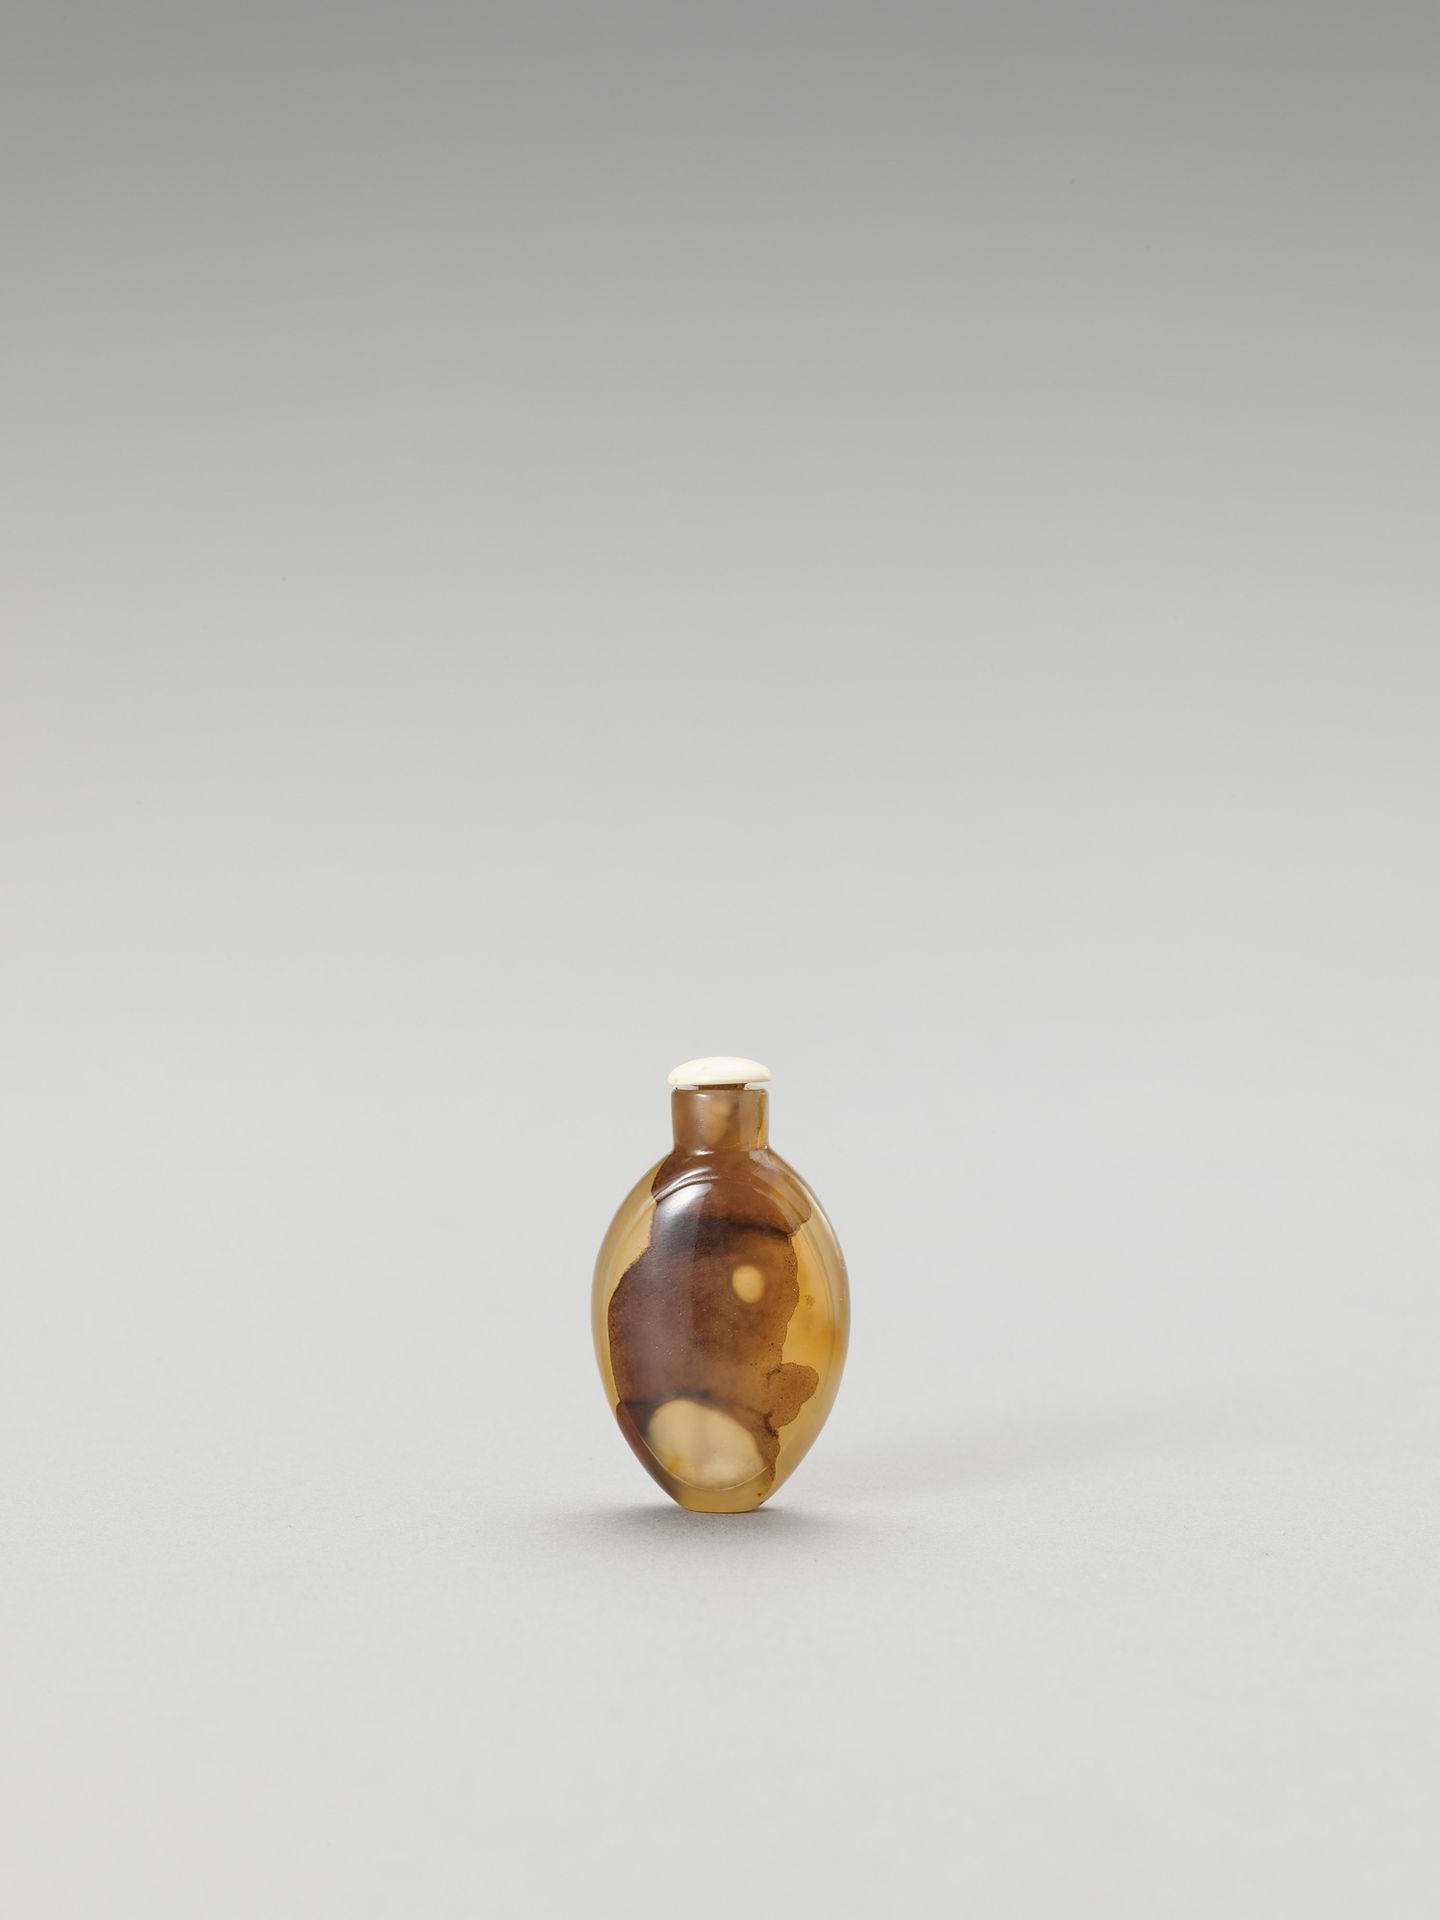 AN AGATE LADIES SNUFF BOTTLE AN AGATE LADIES SNUFF BOTTLE
China, 19th century. T&hellip;